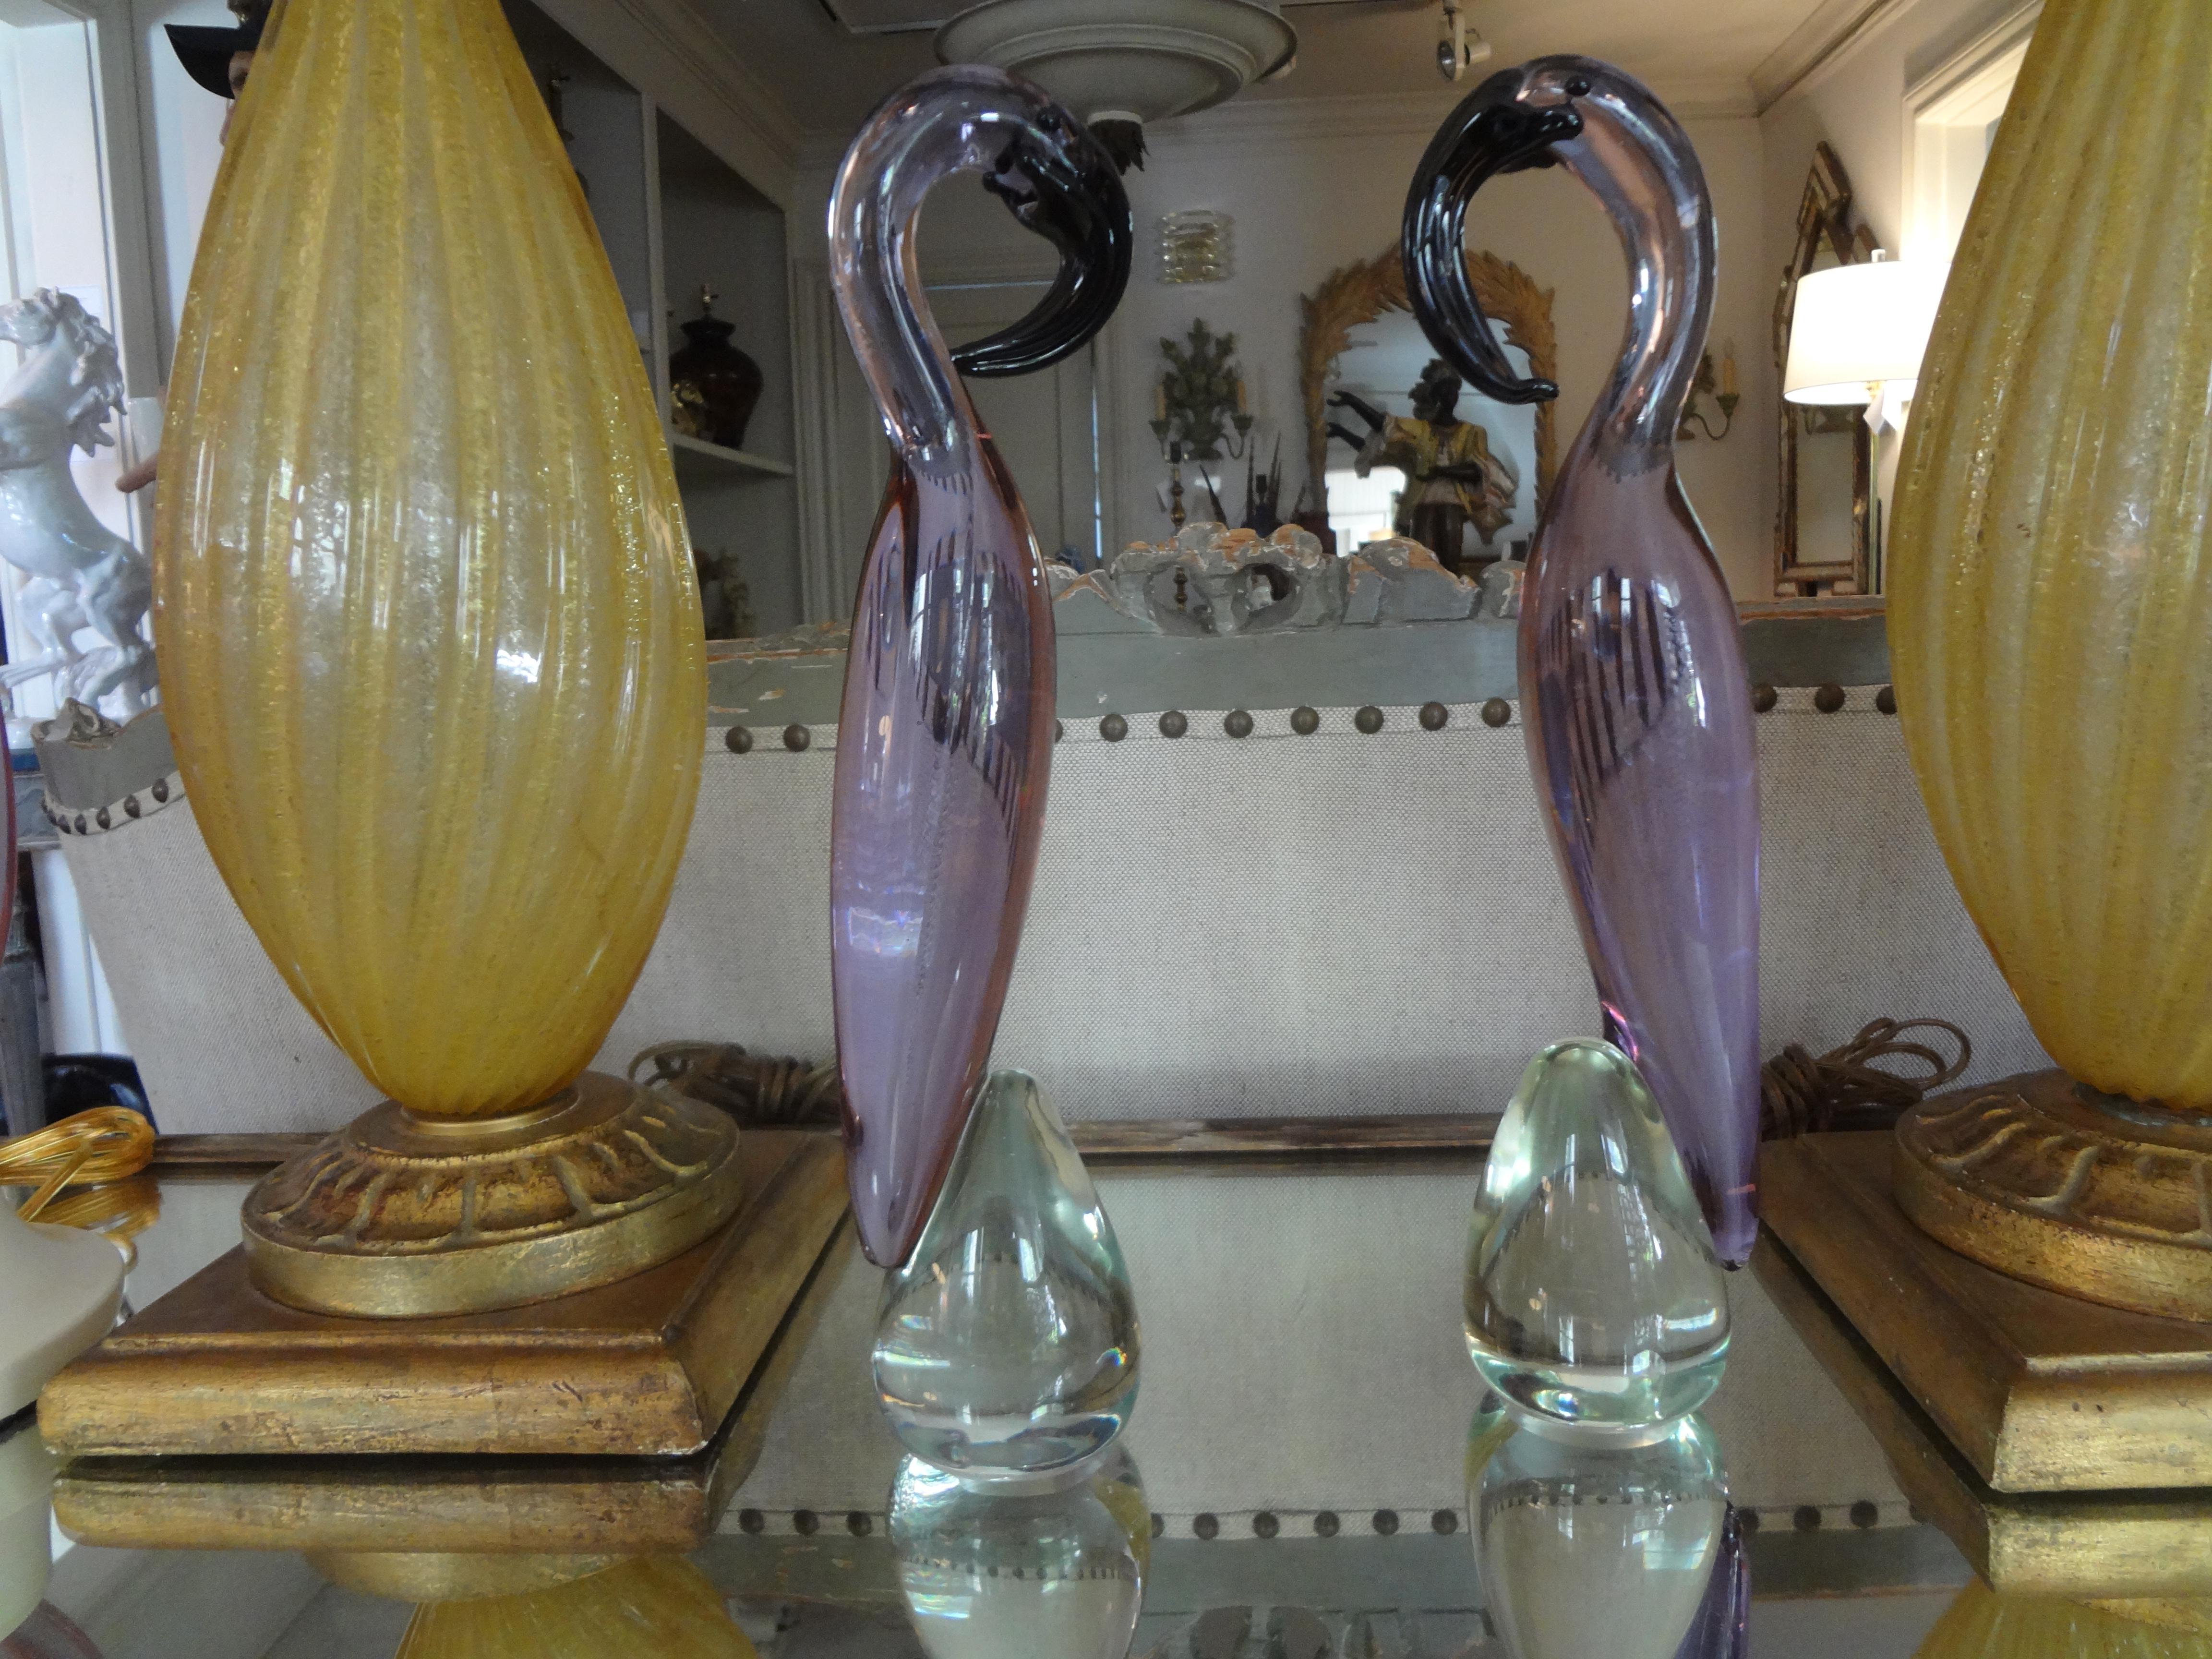 Pair of Murano Glass Flamingos
Stunning pair of lavender Murano glass flamingo sculptures. This beautiful vintage pair of Italian Murano flamingos in a most unusual color was made in the mid-1950s by a Premier Glass House. Possibly Barovier, Seguso